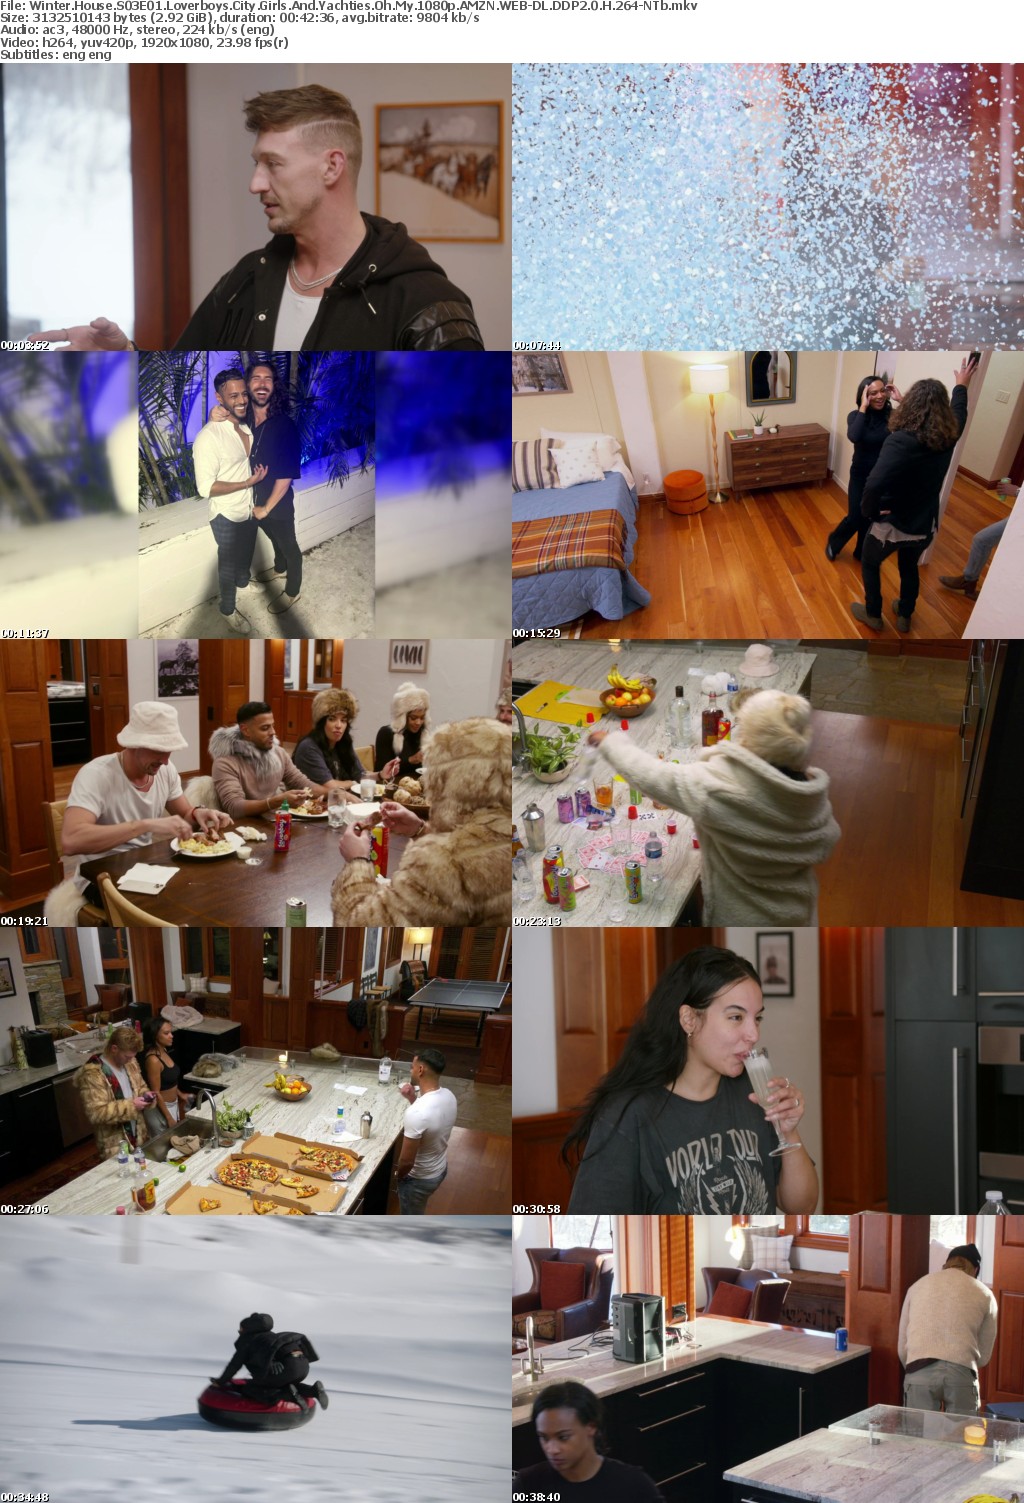 Winter House S03E01 Loverboys City Girls And Yachties Oh My 1080p AMZN WEB-DL DDP2 0 H 264-NTb